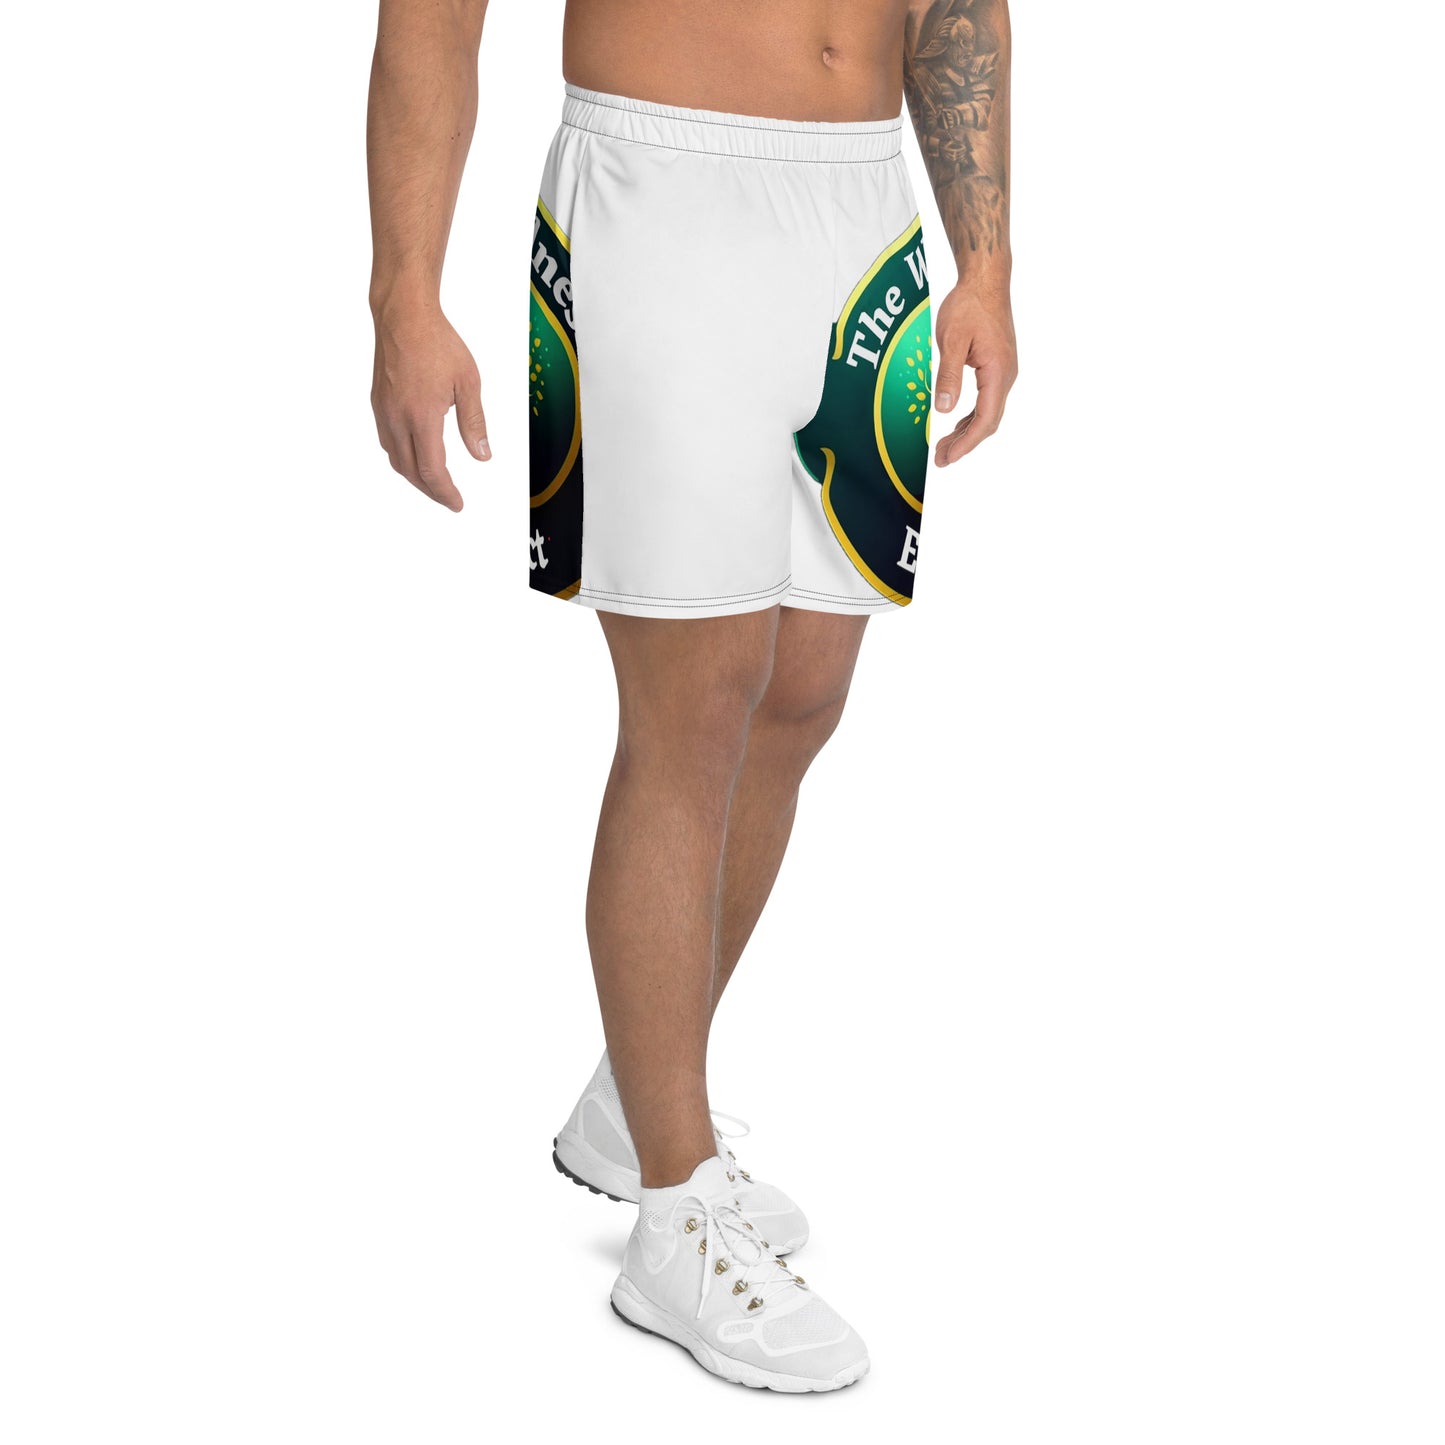 The Wellness Effect Men's Recycled Athletic Shorts